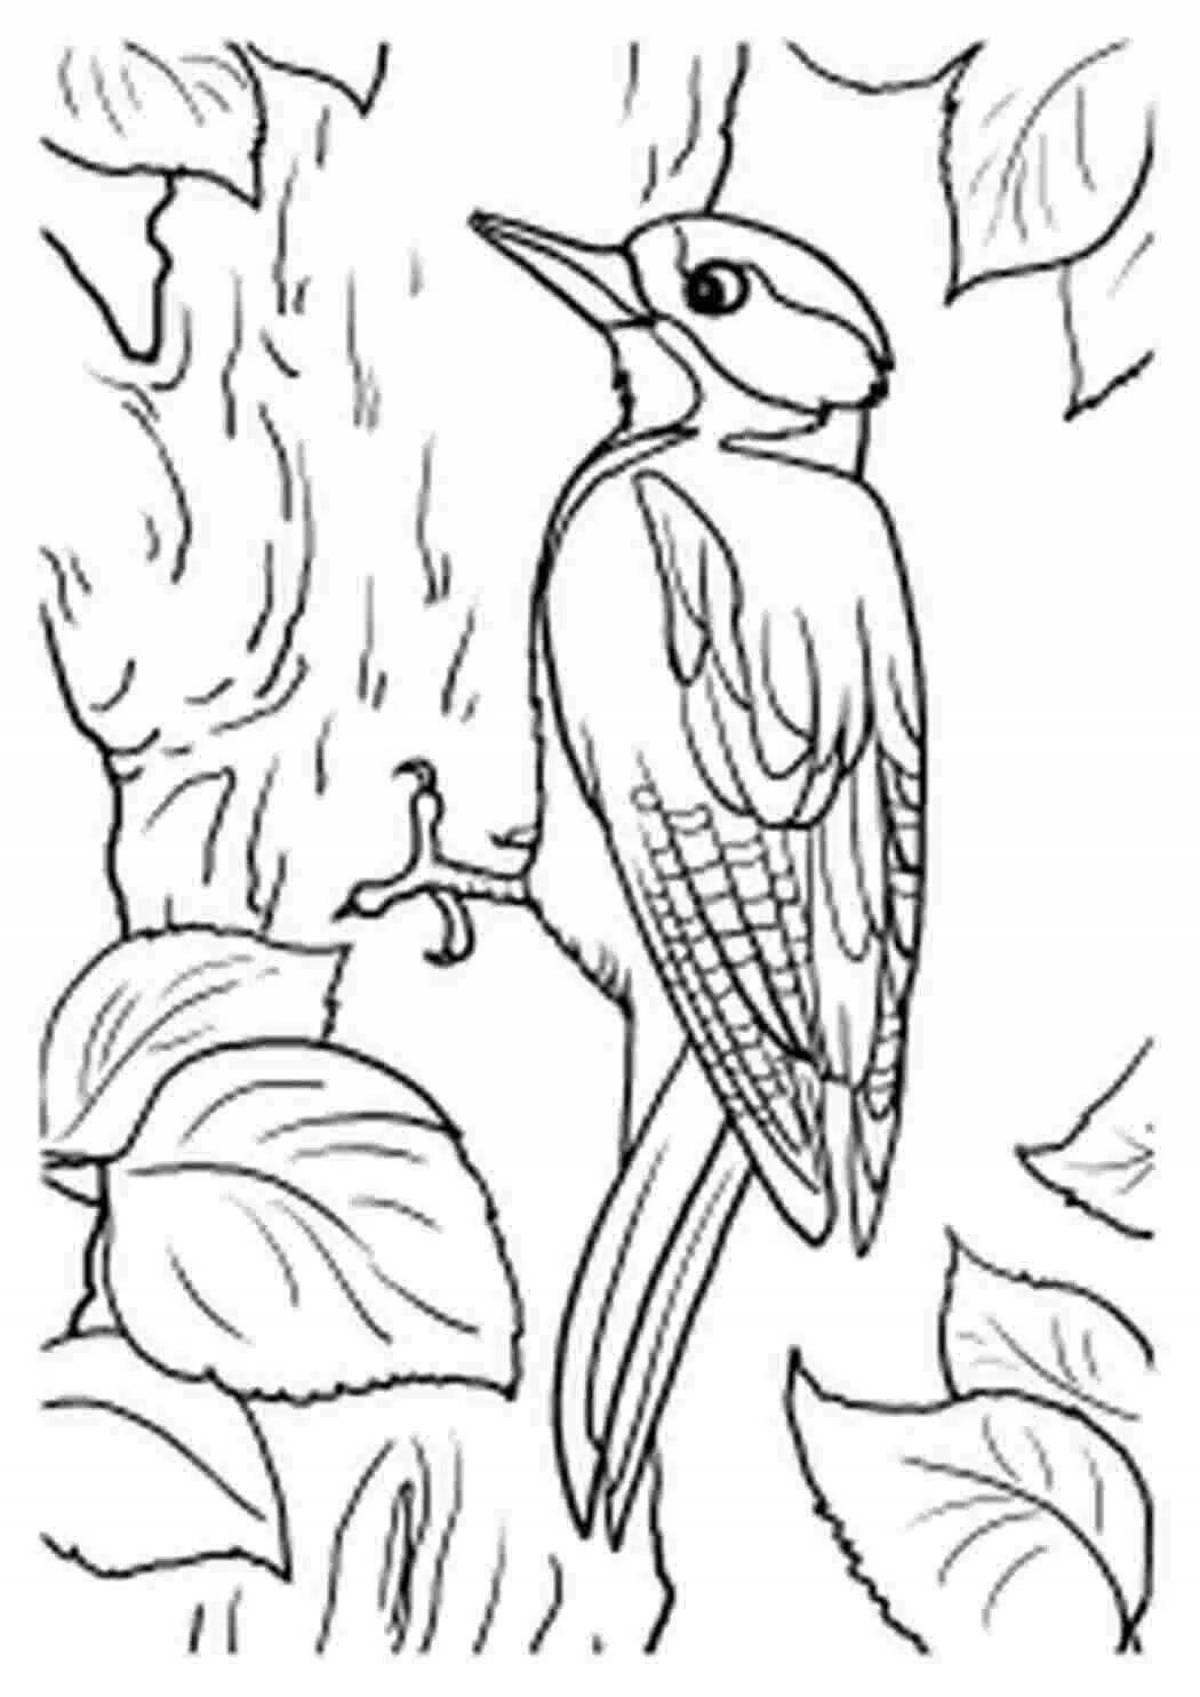 Coloring book fat woodpecker for children 6-7 years old